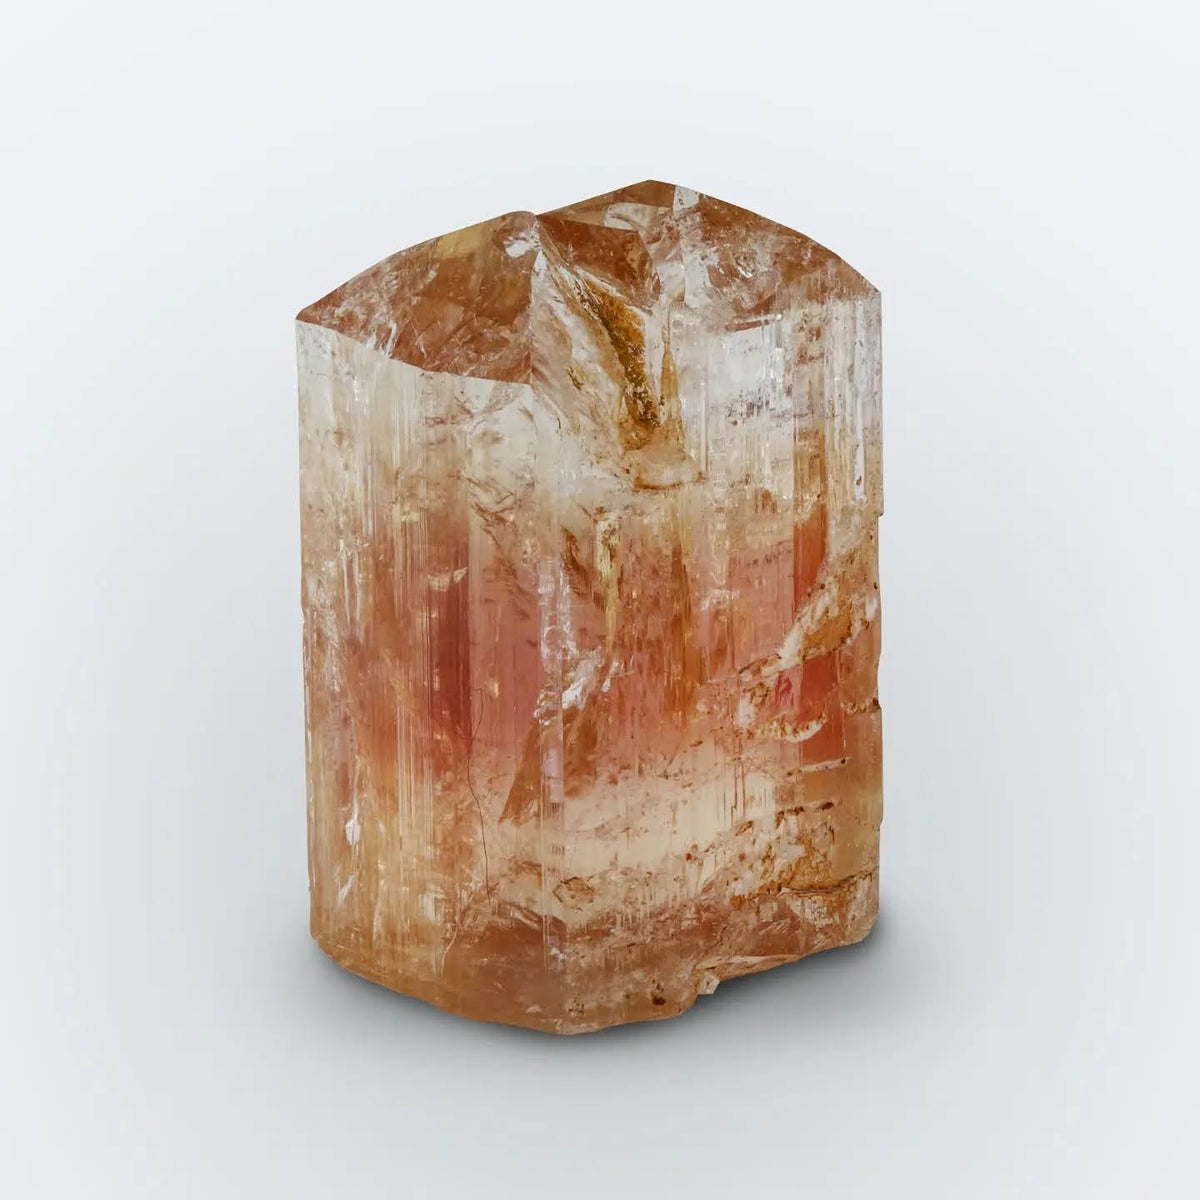 Topaz Crystal With Great Luster